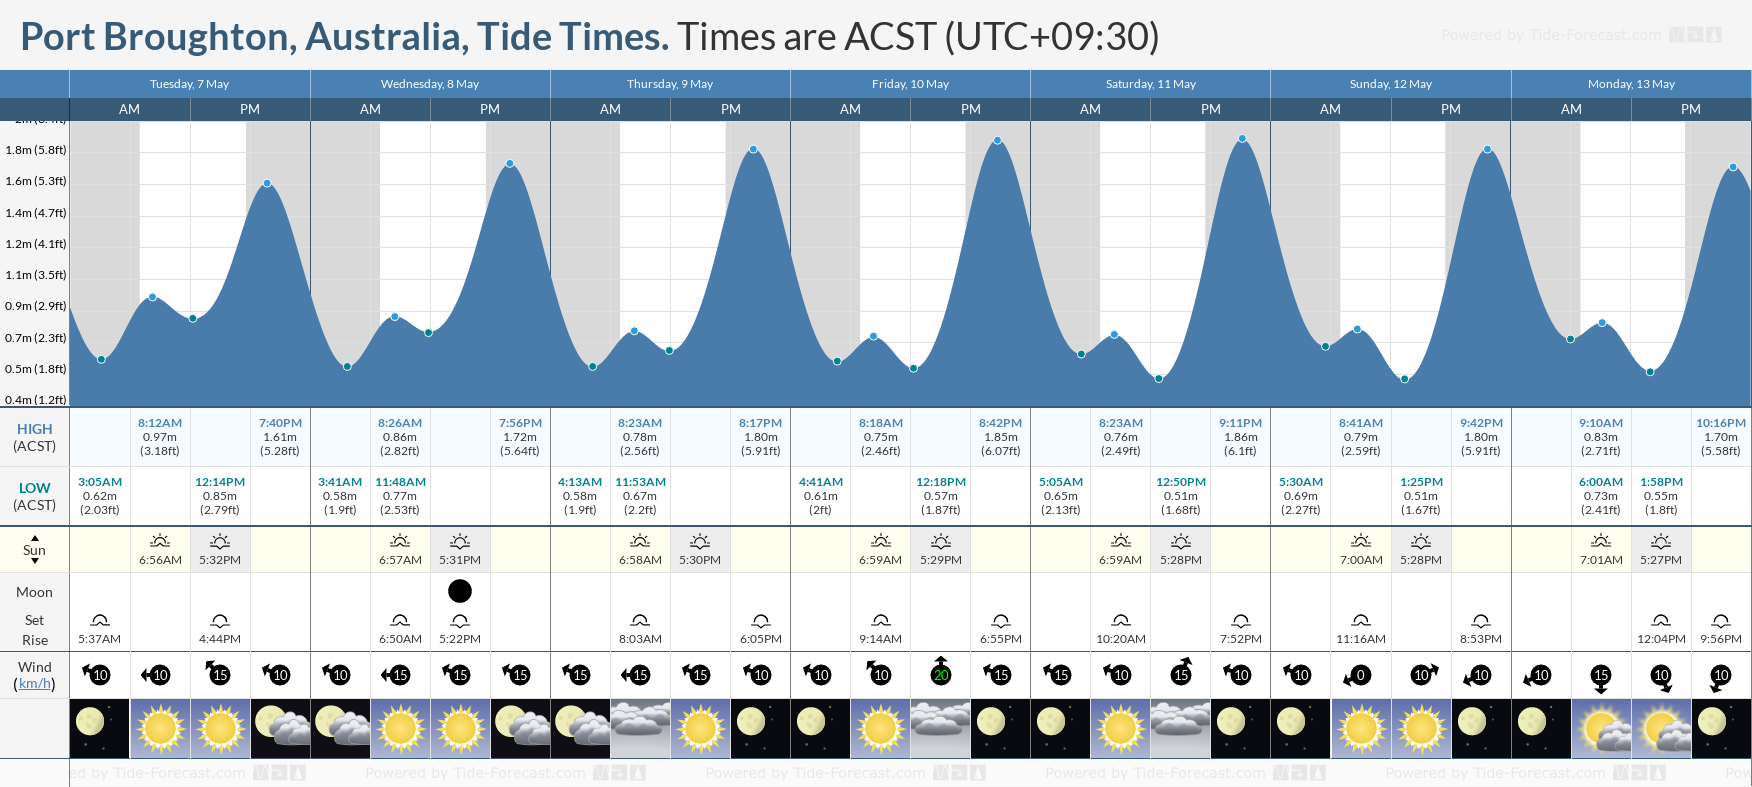 Port Broughton, Australia Tide Chart including high and low tide tide times for the next 7 days